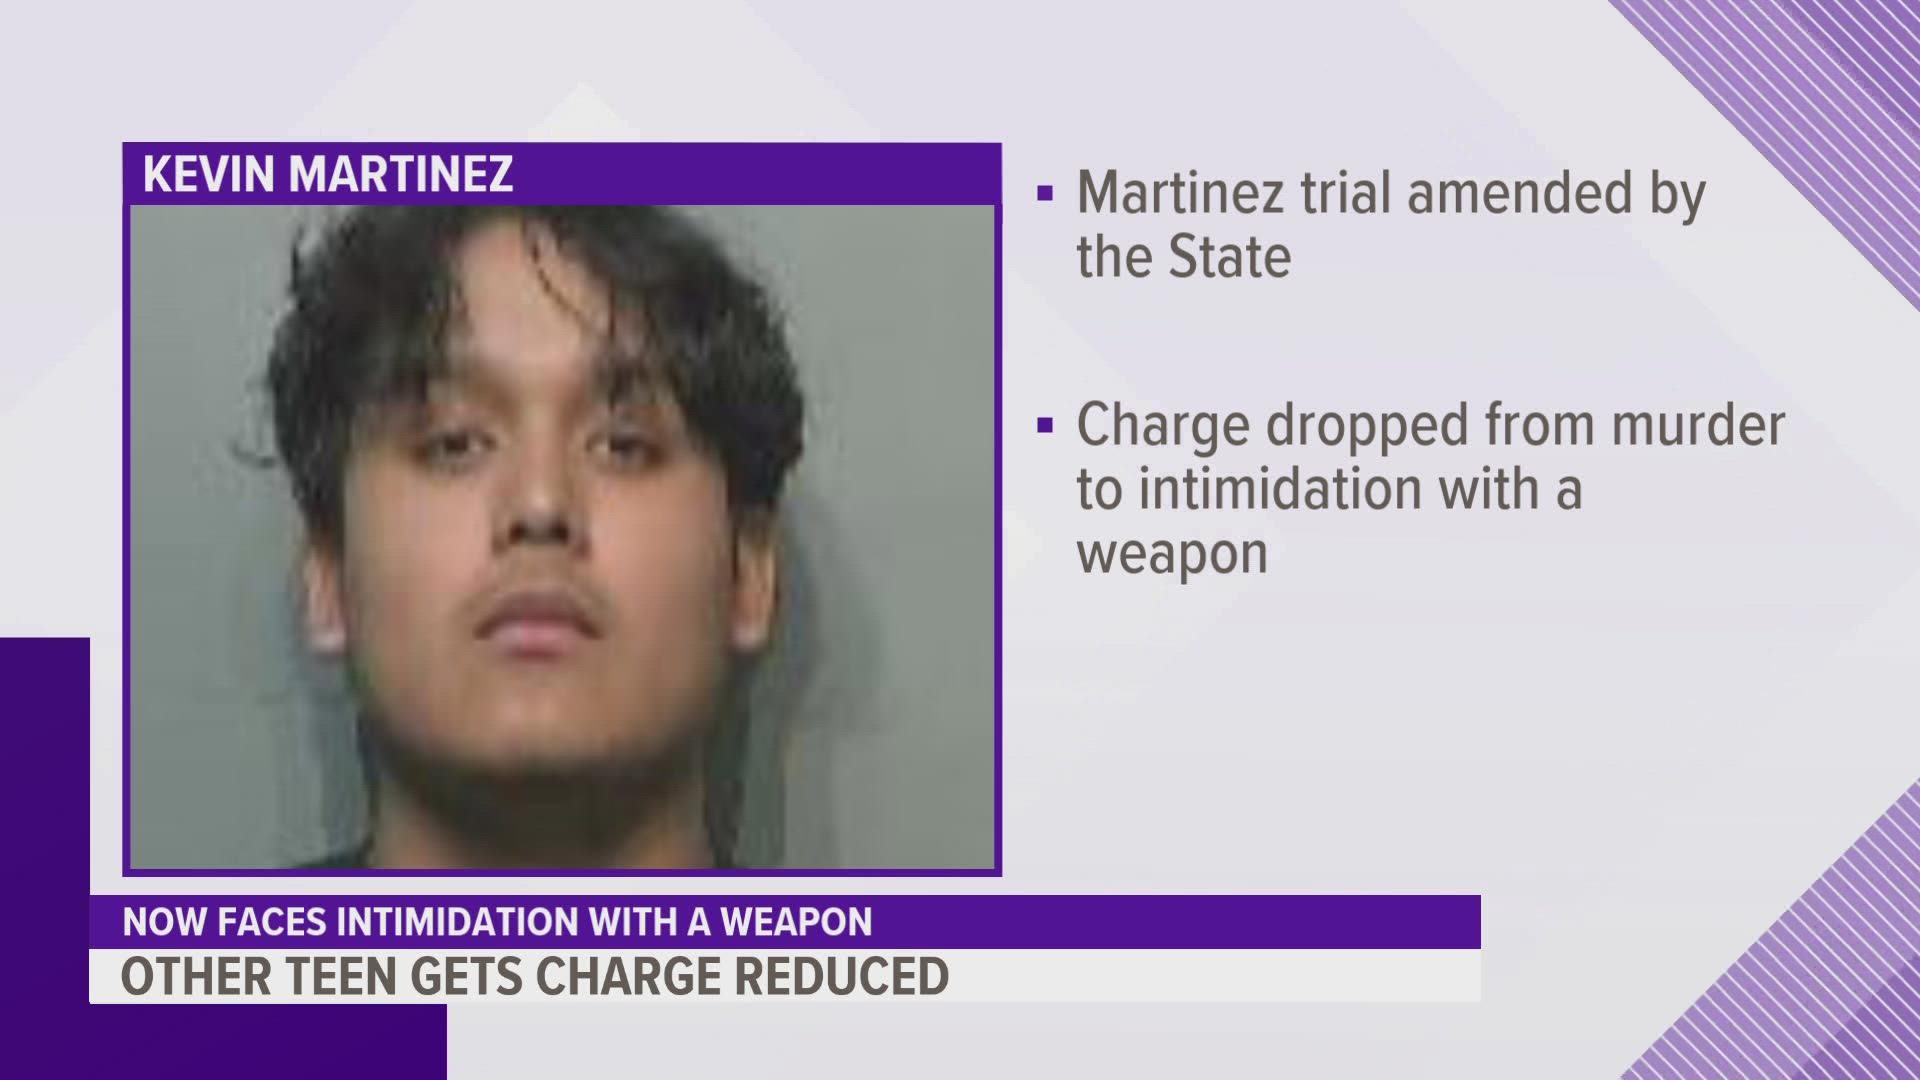 Kevin Martinez will now be charged with two counts of intimidation with a weapon.